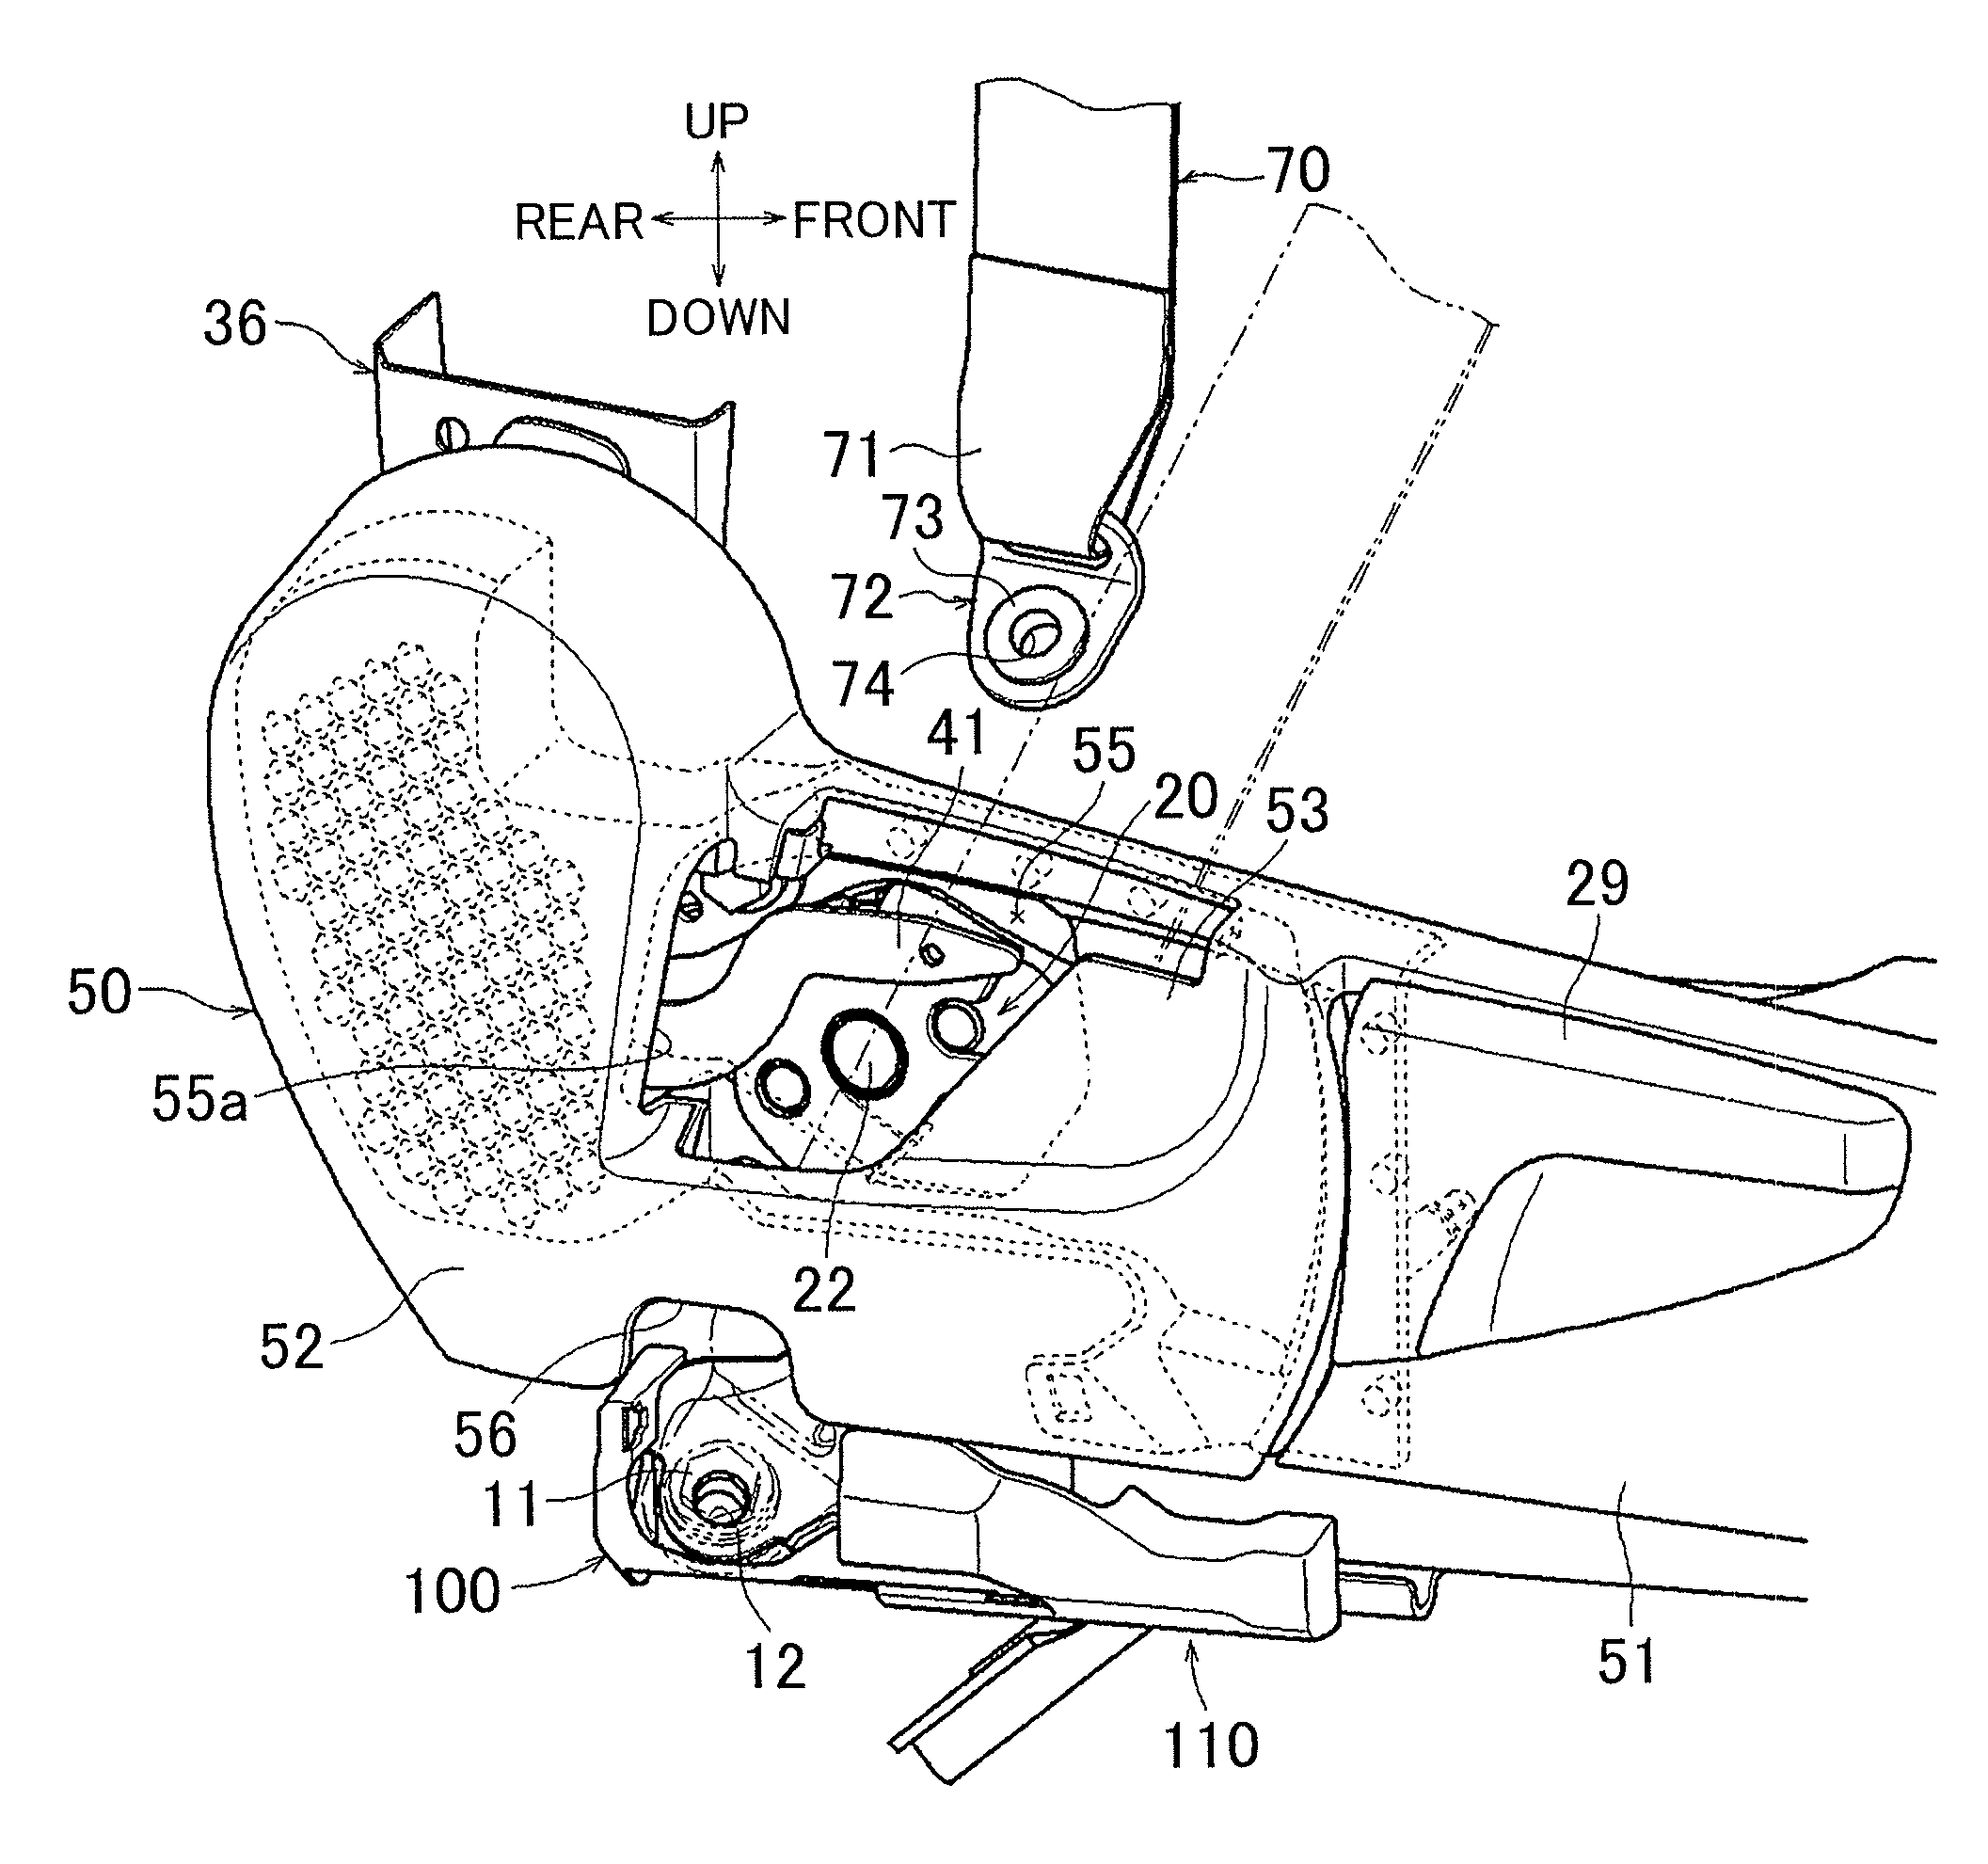 Side shield structure for vehicle seat